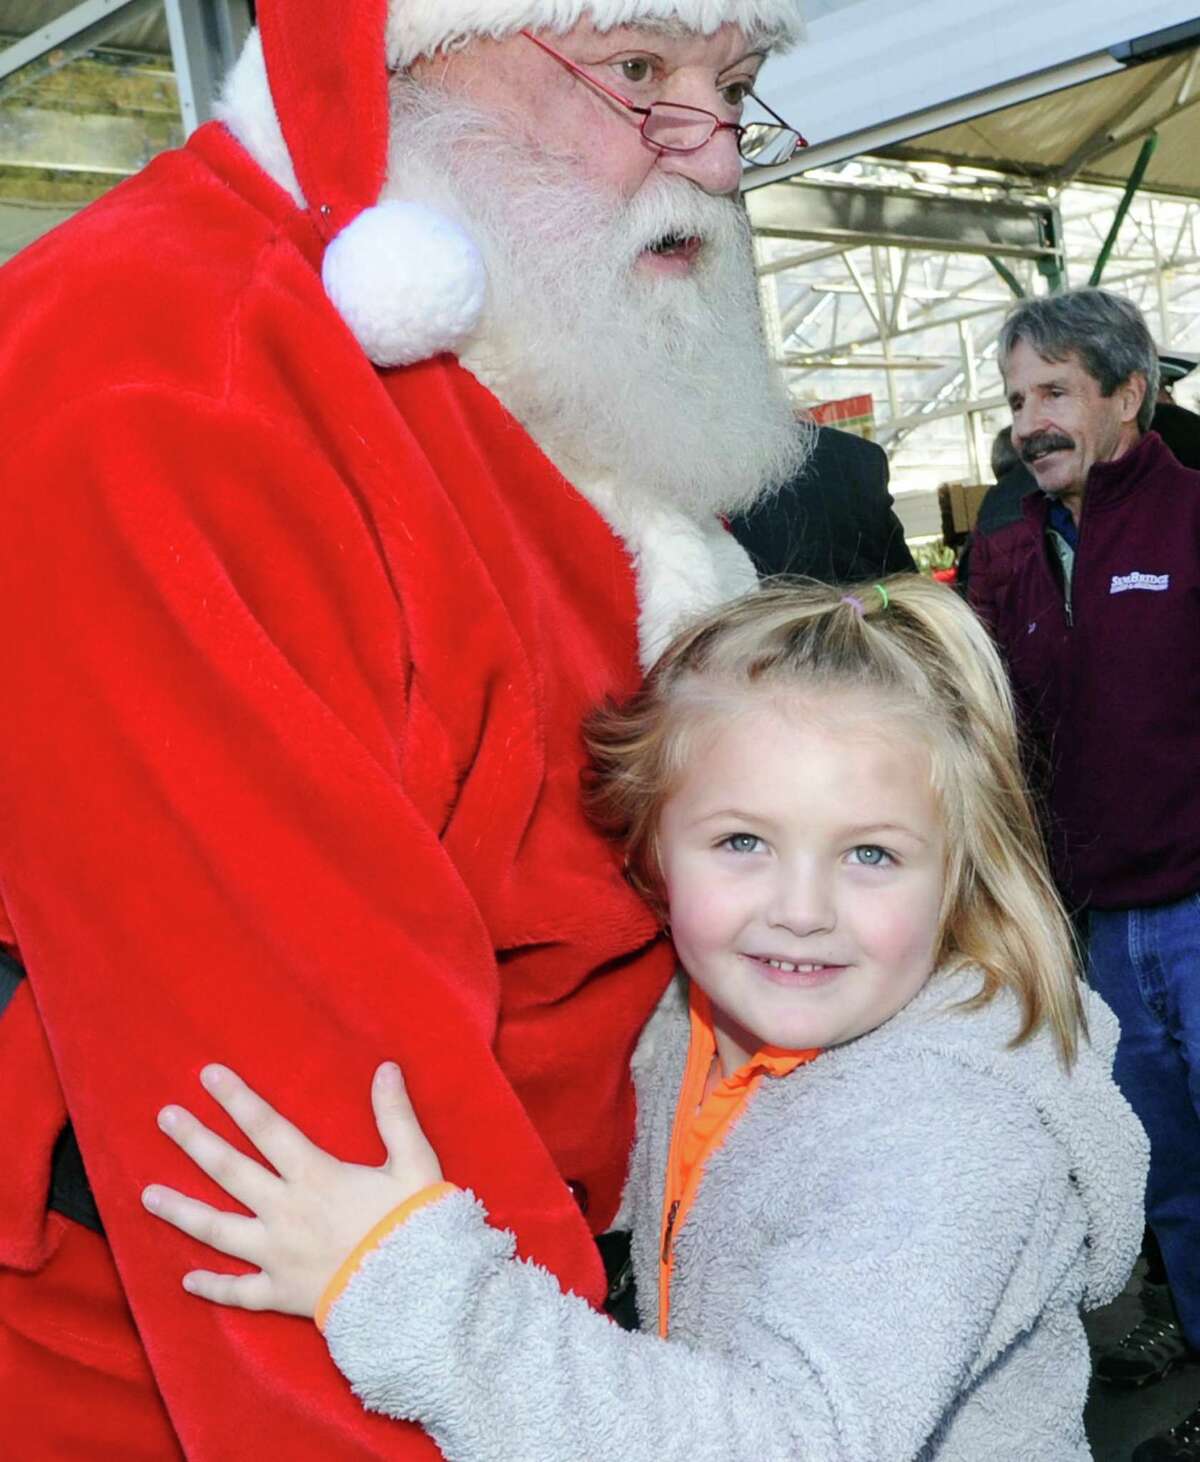 Reagan Roitsch, 5, of Greenwich, hugs Santa during the Greenwich Reindeer Festival & Santa's Village at Sam Bridge Nursery & Greenhouses in Greenwich, Conn., Friday, Nov. 24, 2017. The reindeer will be on hand through Dec. 23rd and Santa is available for photos Monday - Friday from noon to 6 p.m., Saturdays 9:00 a.m. - 6 p.m., through Dec. 23rd. Sam Bridge Nursery & Greenhouses is located at 437 North Street in Greenwich.